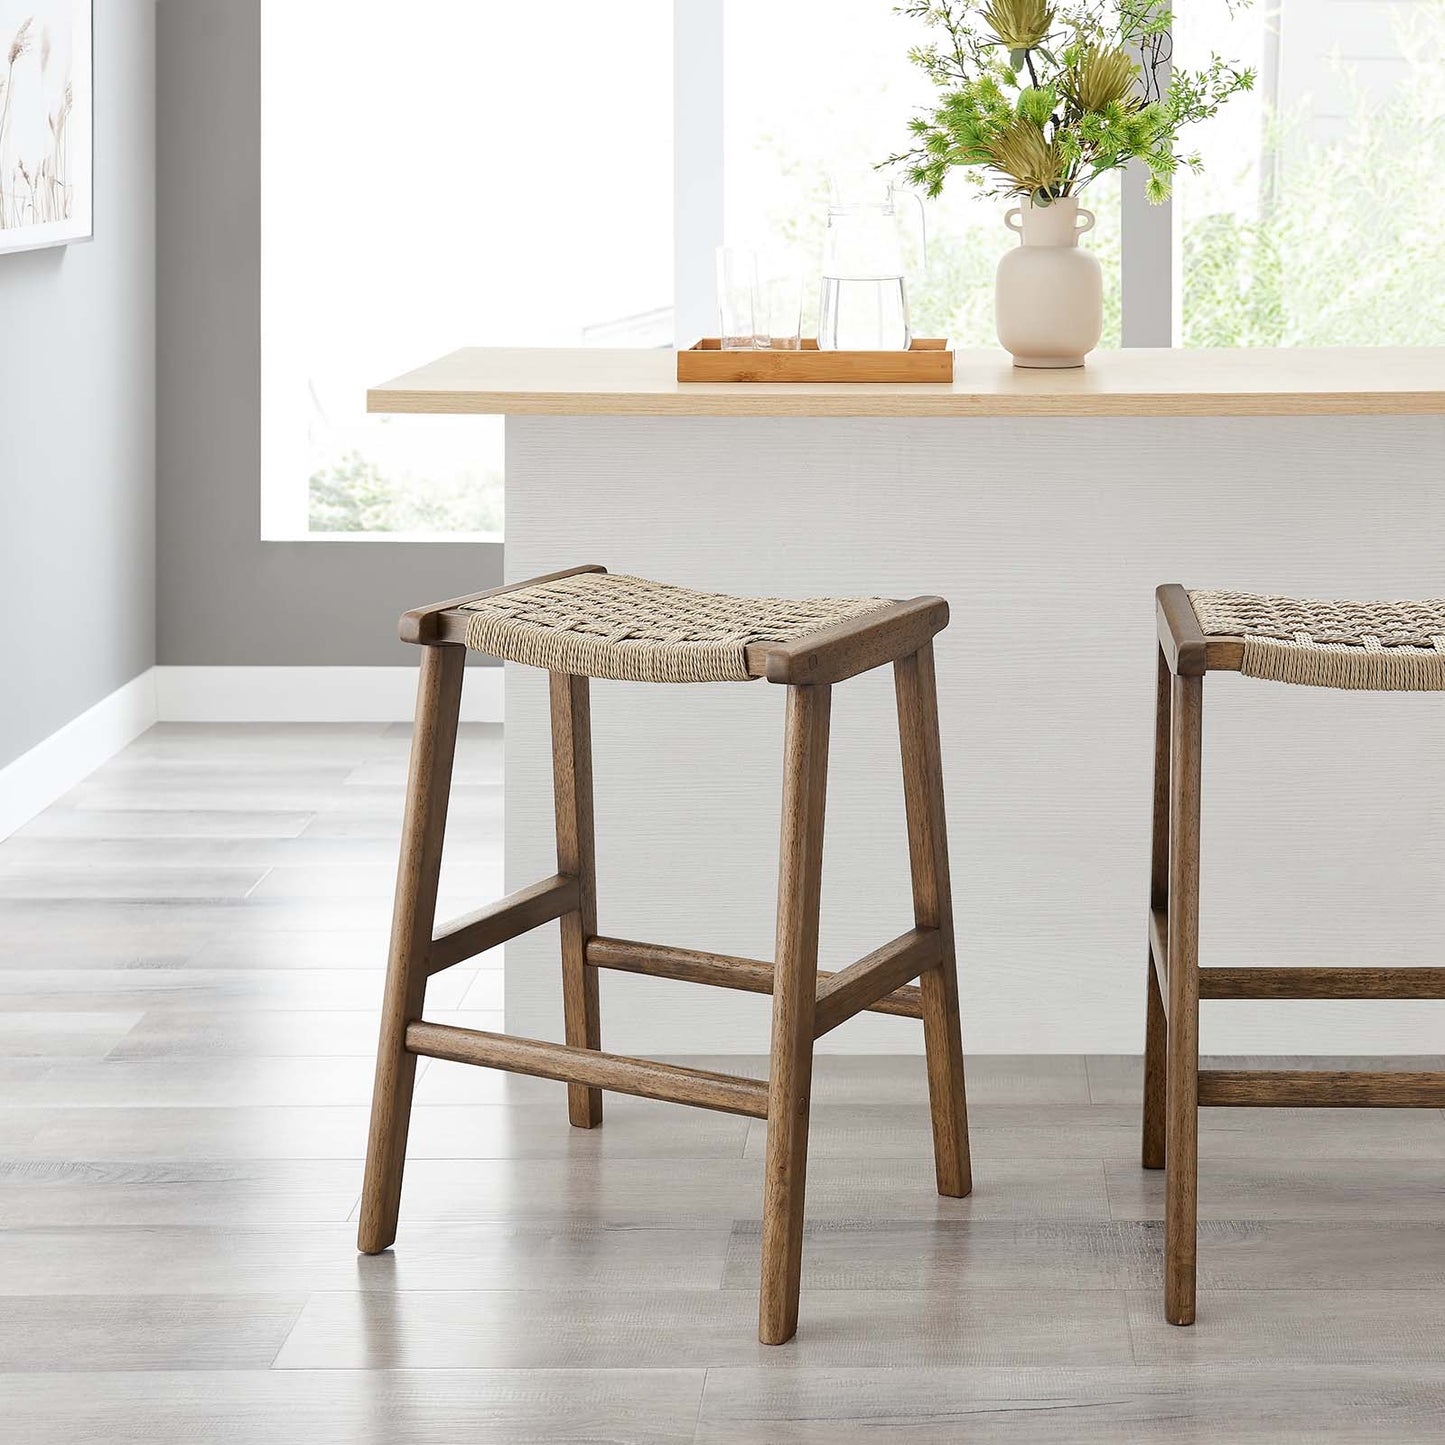 Saoirse Woven Rope Wood Counter Stool - Set of 2 By Modway - EEI-6548 | Counter Stools | Modway - 29